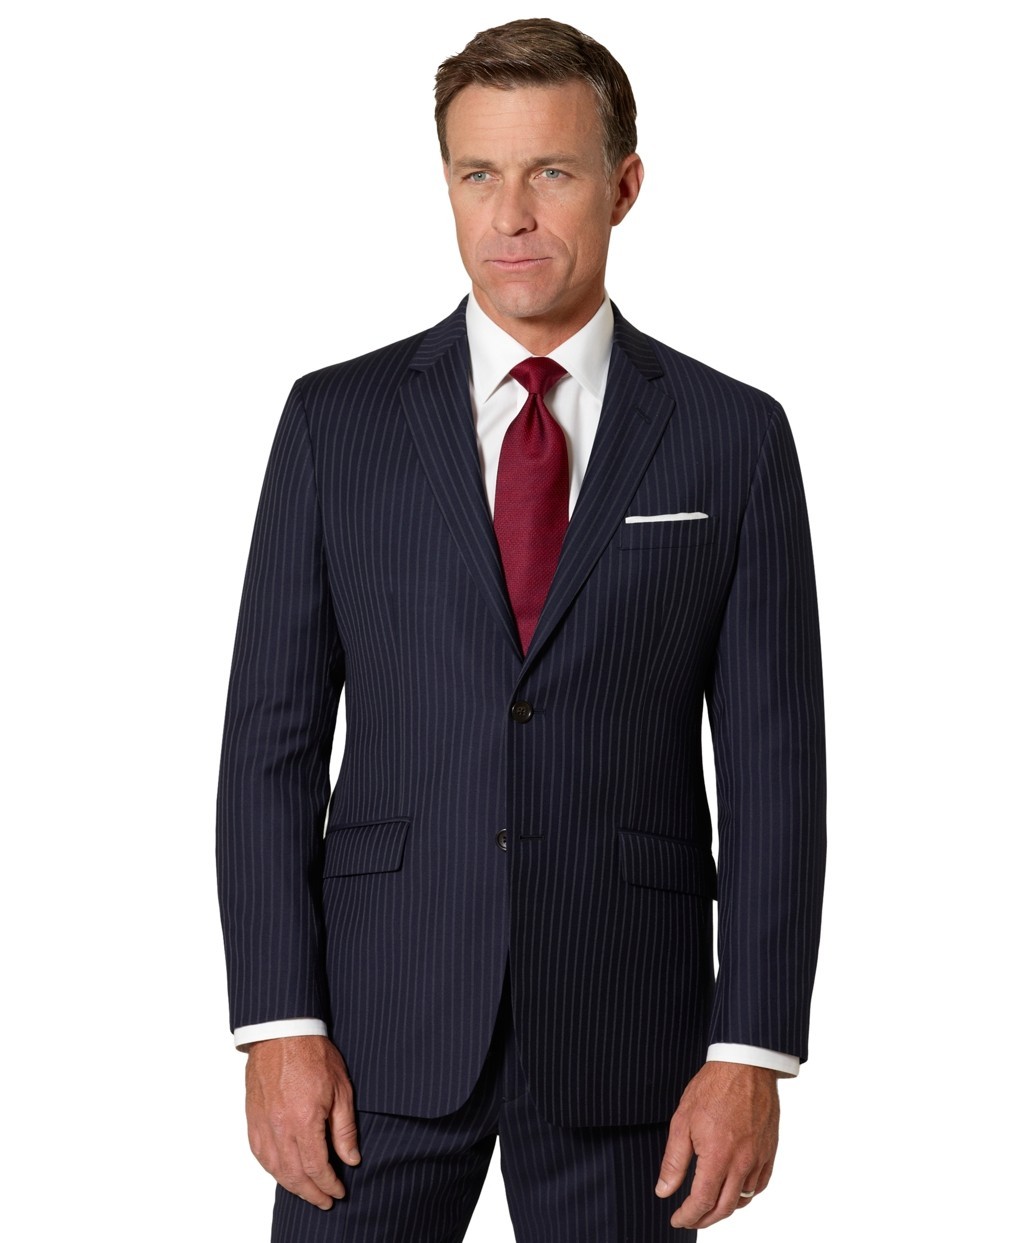 Is BB navy blue pin stripe suit okay for law firm interview?